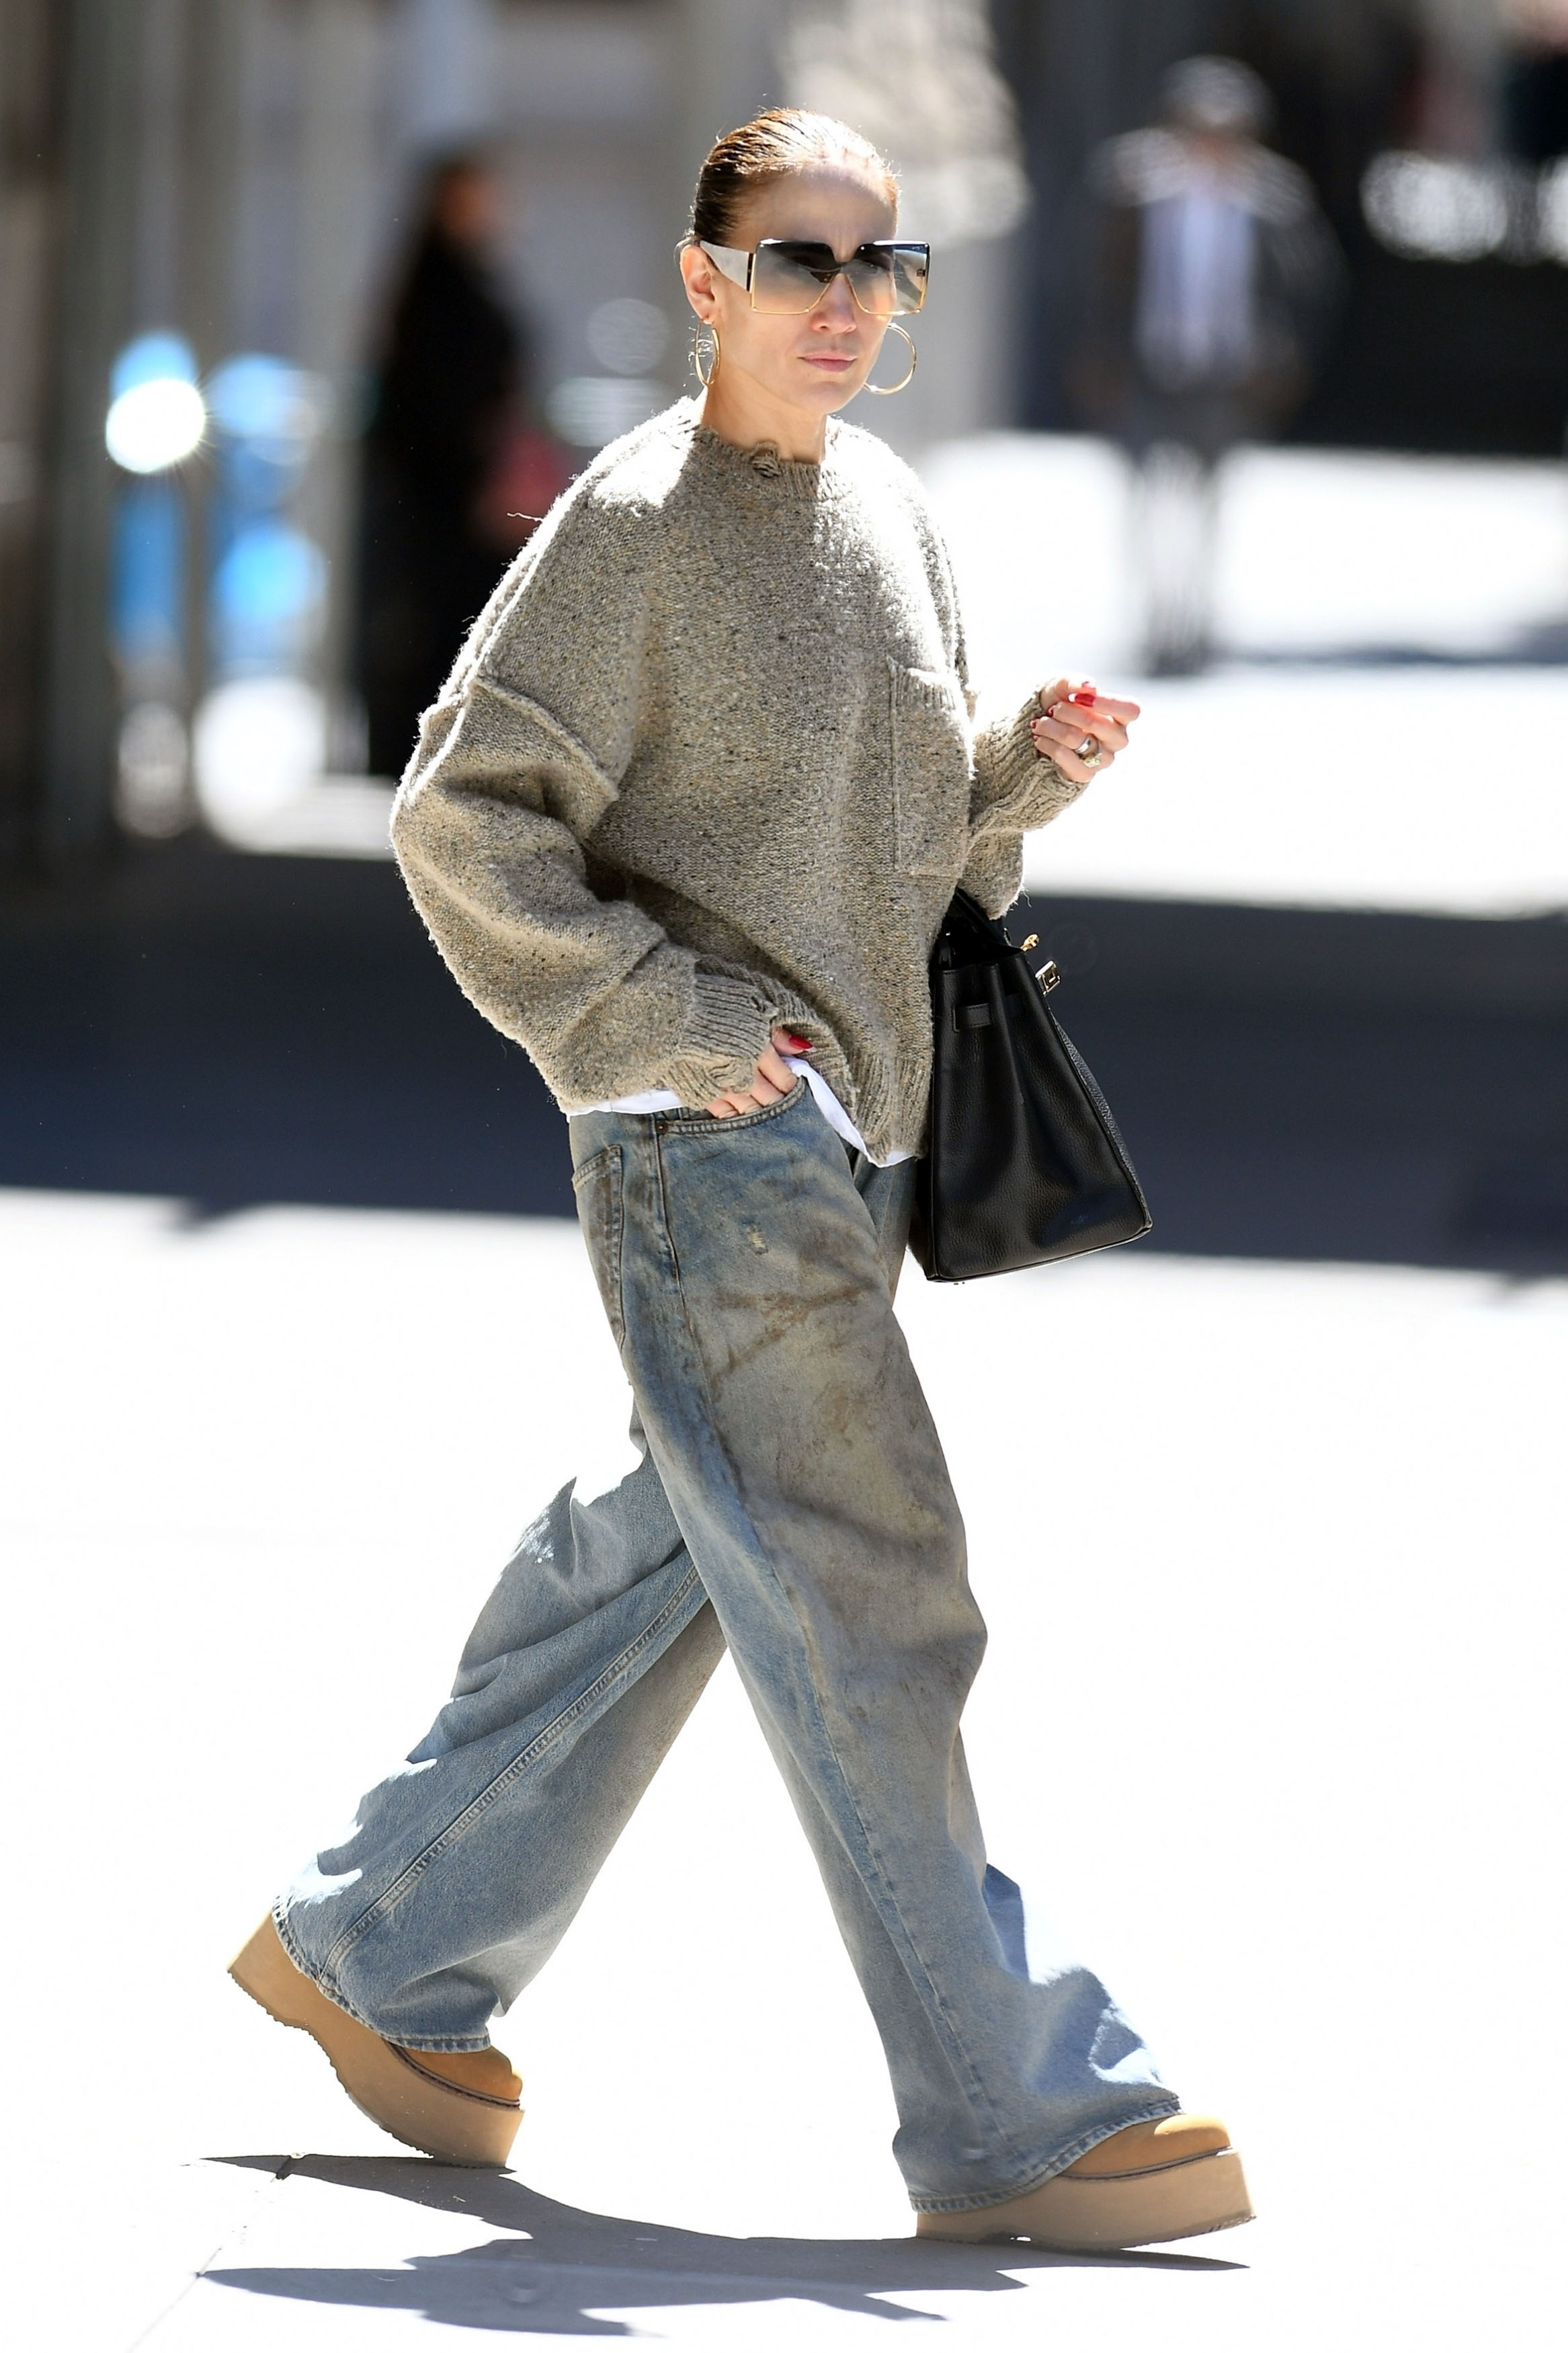 Jennifer Lopez walking on the streets of New York City wearing oversize sunglasses, a slouchy sweater, baggy dirty ACNE Studios jeans, and  R13 double-stack lace-up boots.